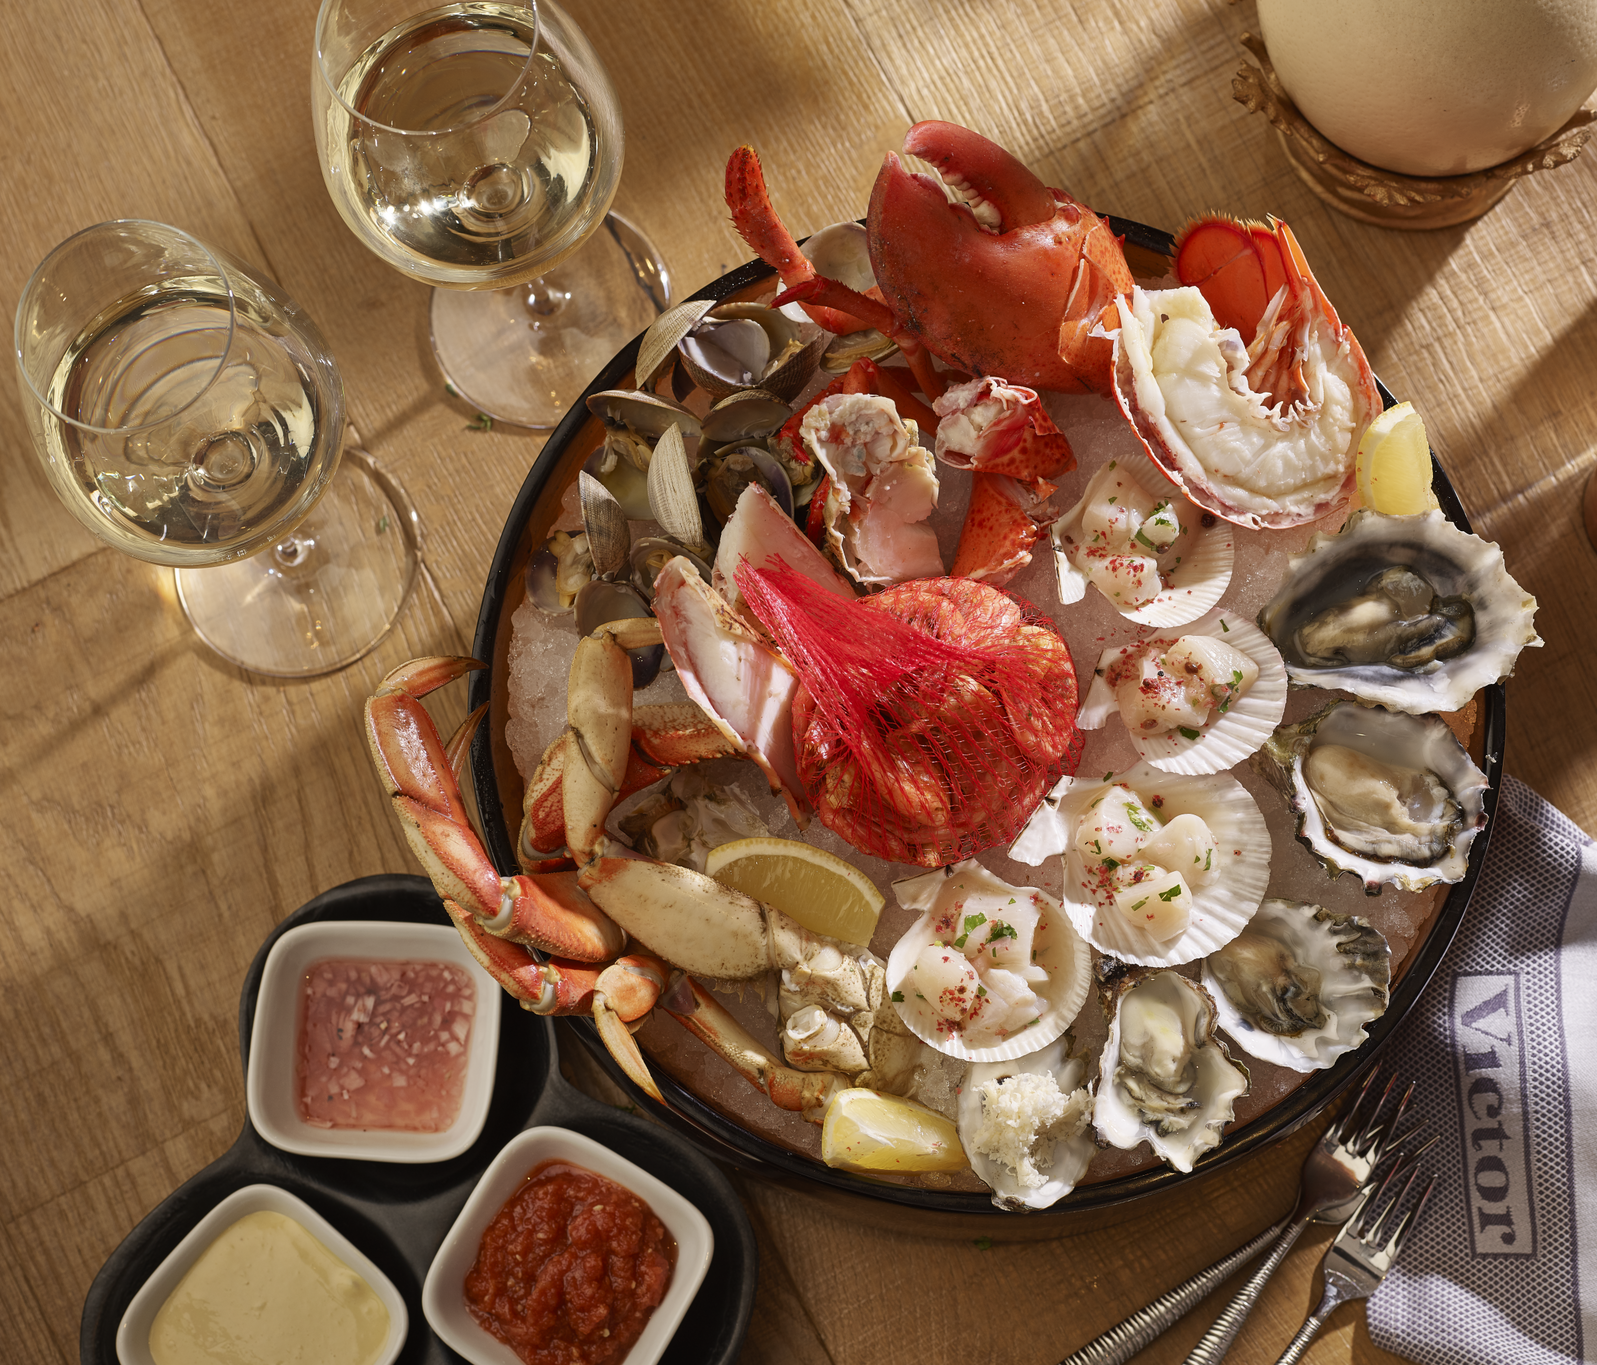 The classic steakhouse highlights Vancouver's excellent seafood in a deluxe platter piled high with local delicacies like oysters, scallops and lobster.